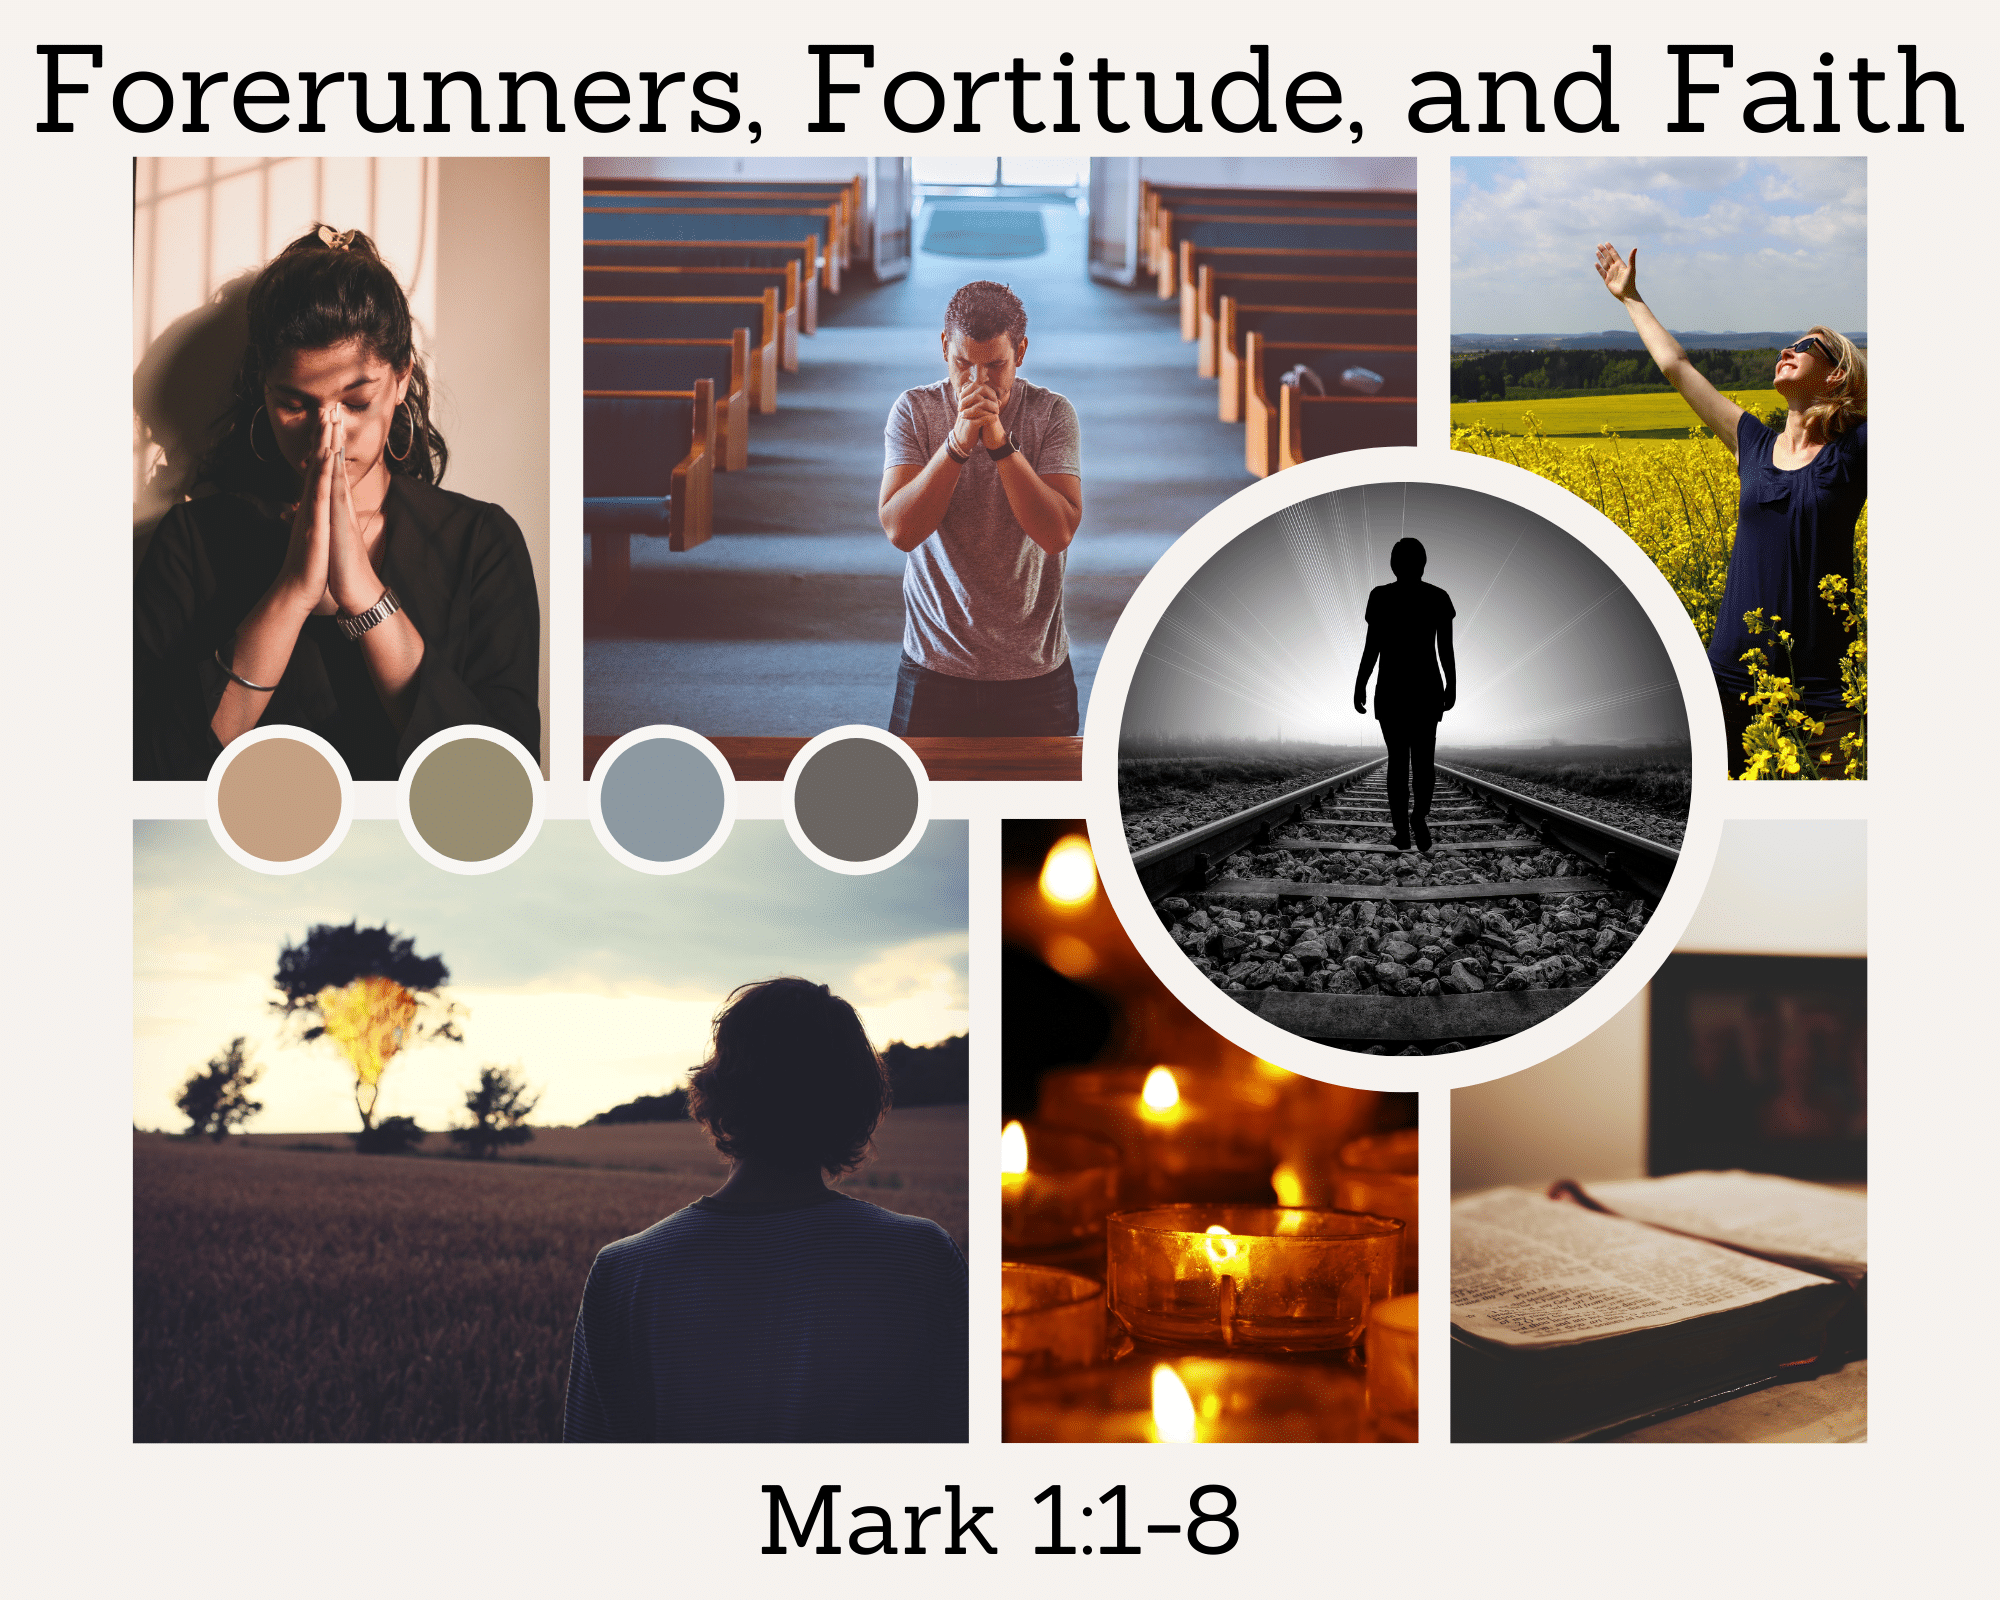 Forerunners, Fortitude, and Faith 12.06.20